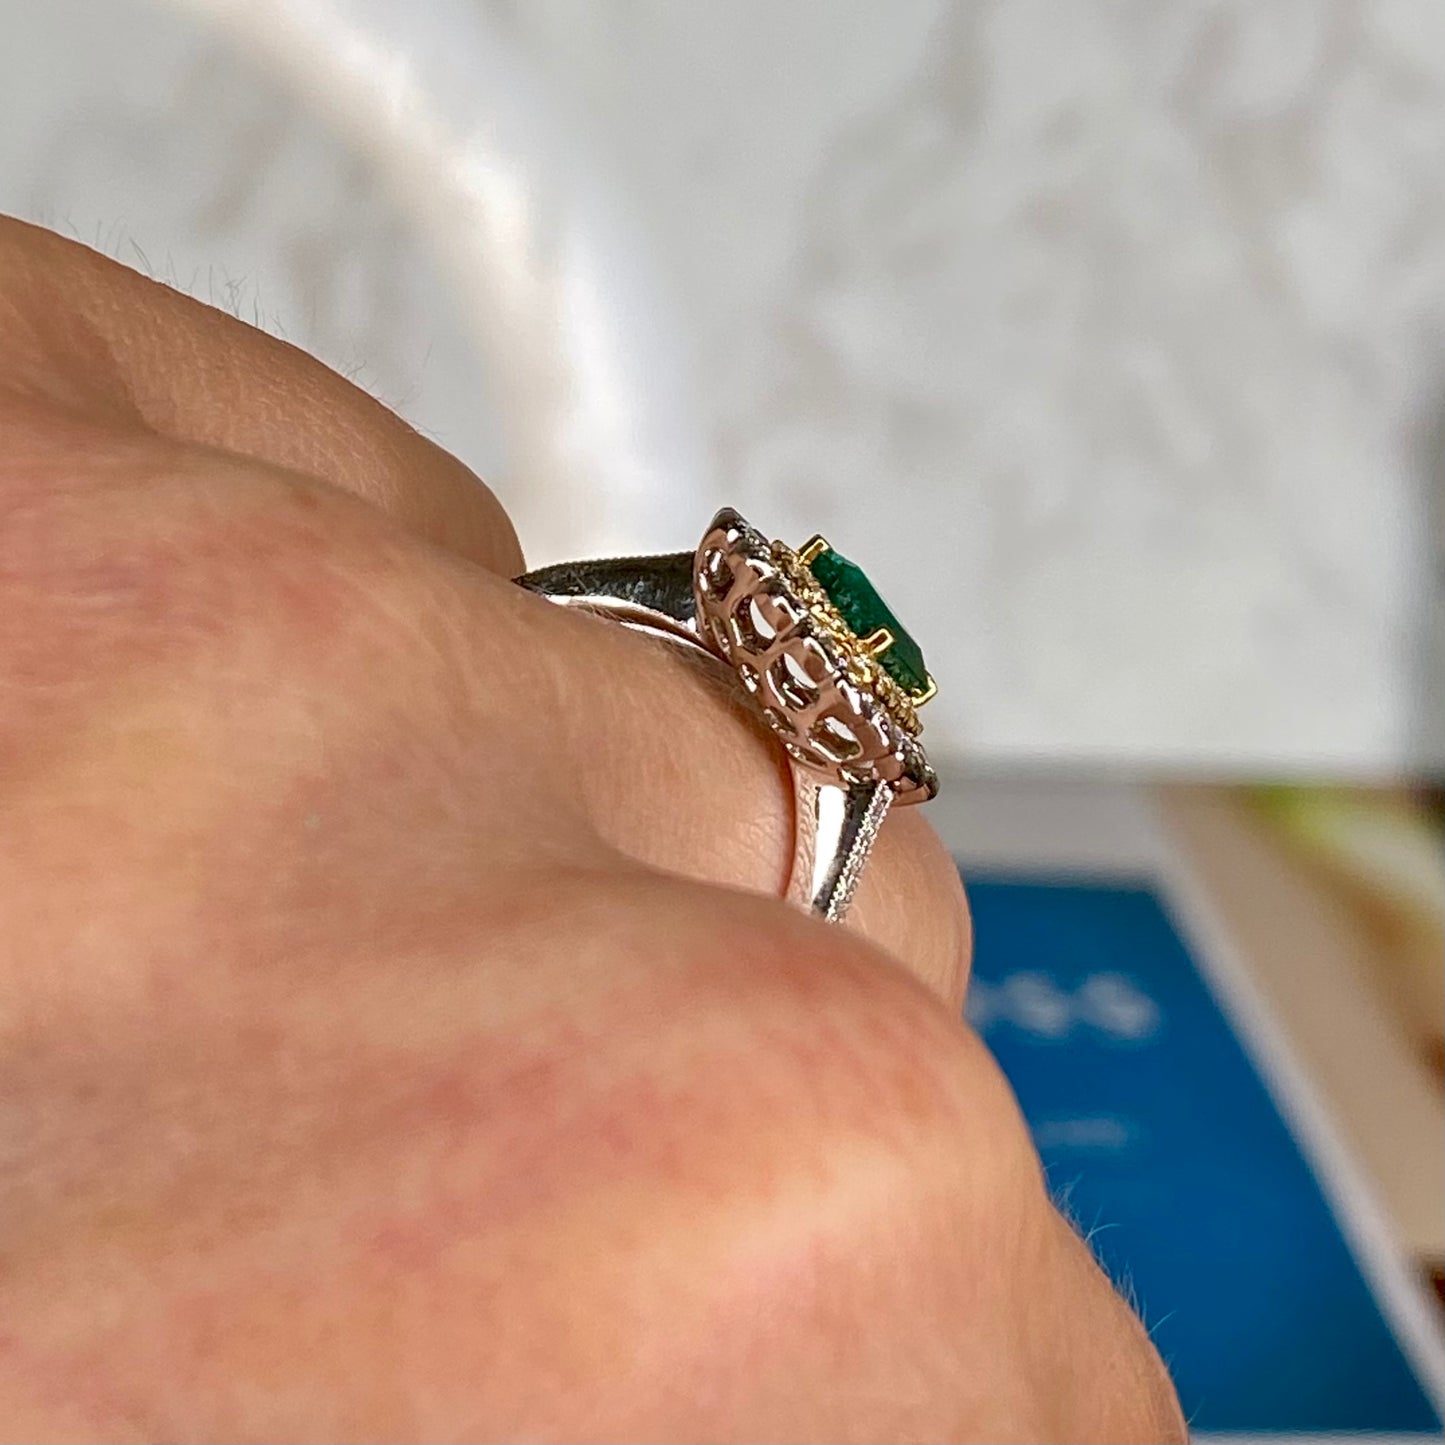 18ct White Gold Emerald & Diamond Double Halo Cluster Ring with Diamond Set Shoulders - John Ross Jewellers